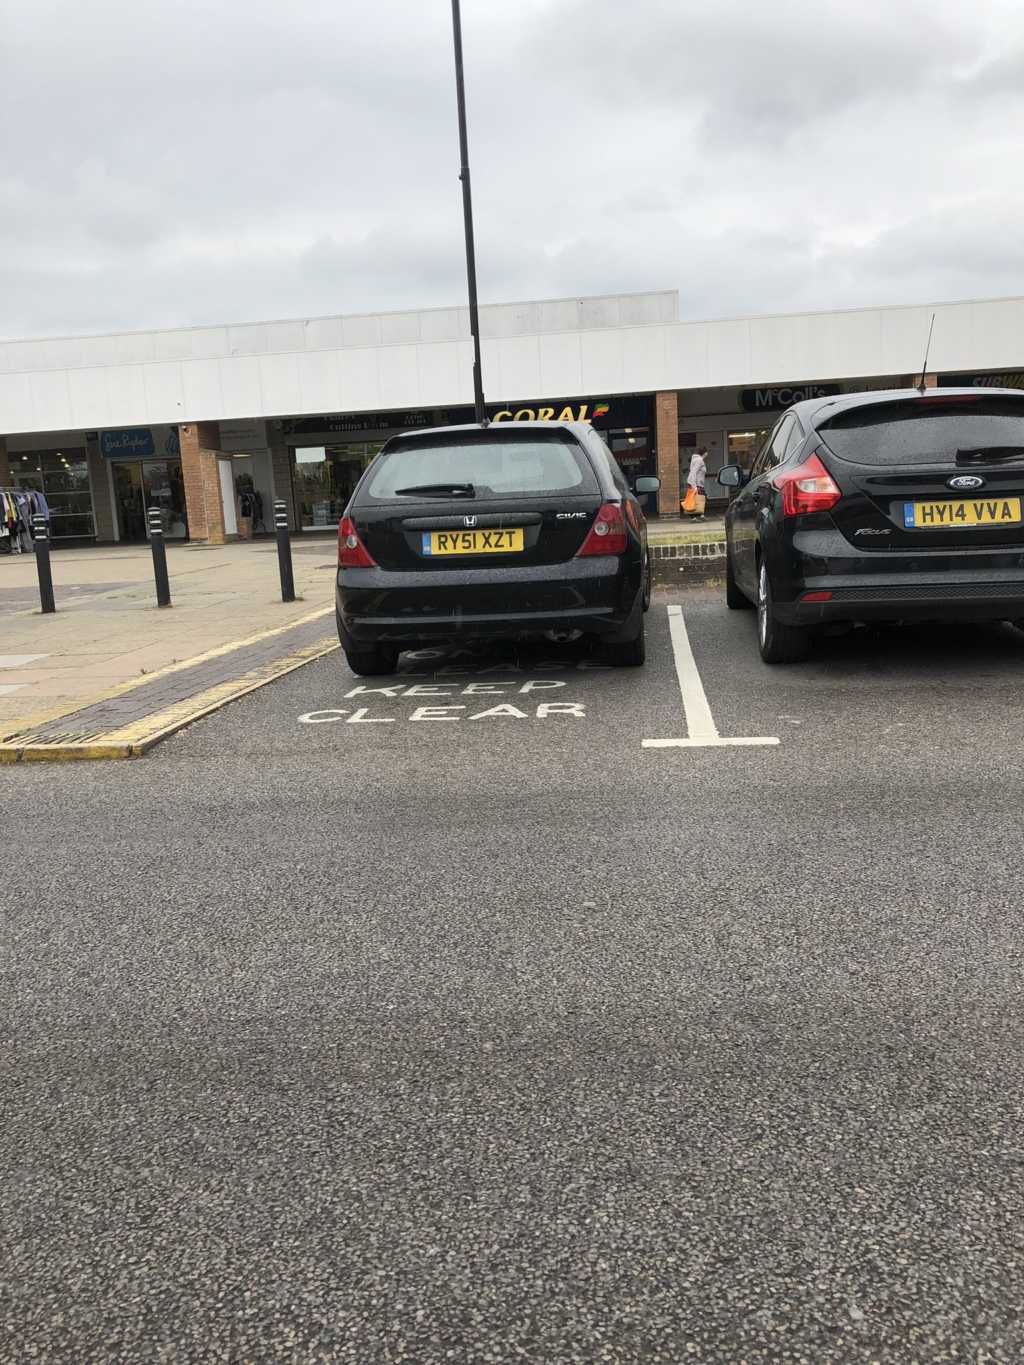 RY51 XZT is a Selfish Parker